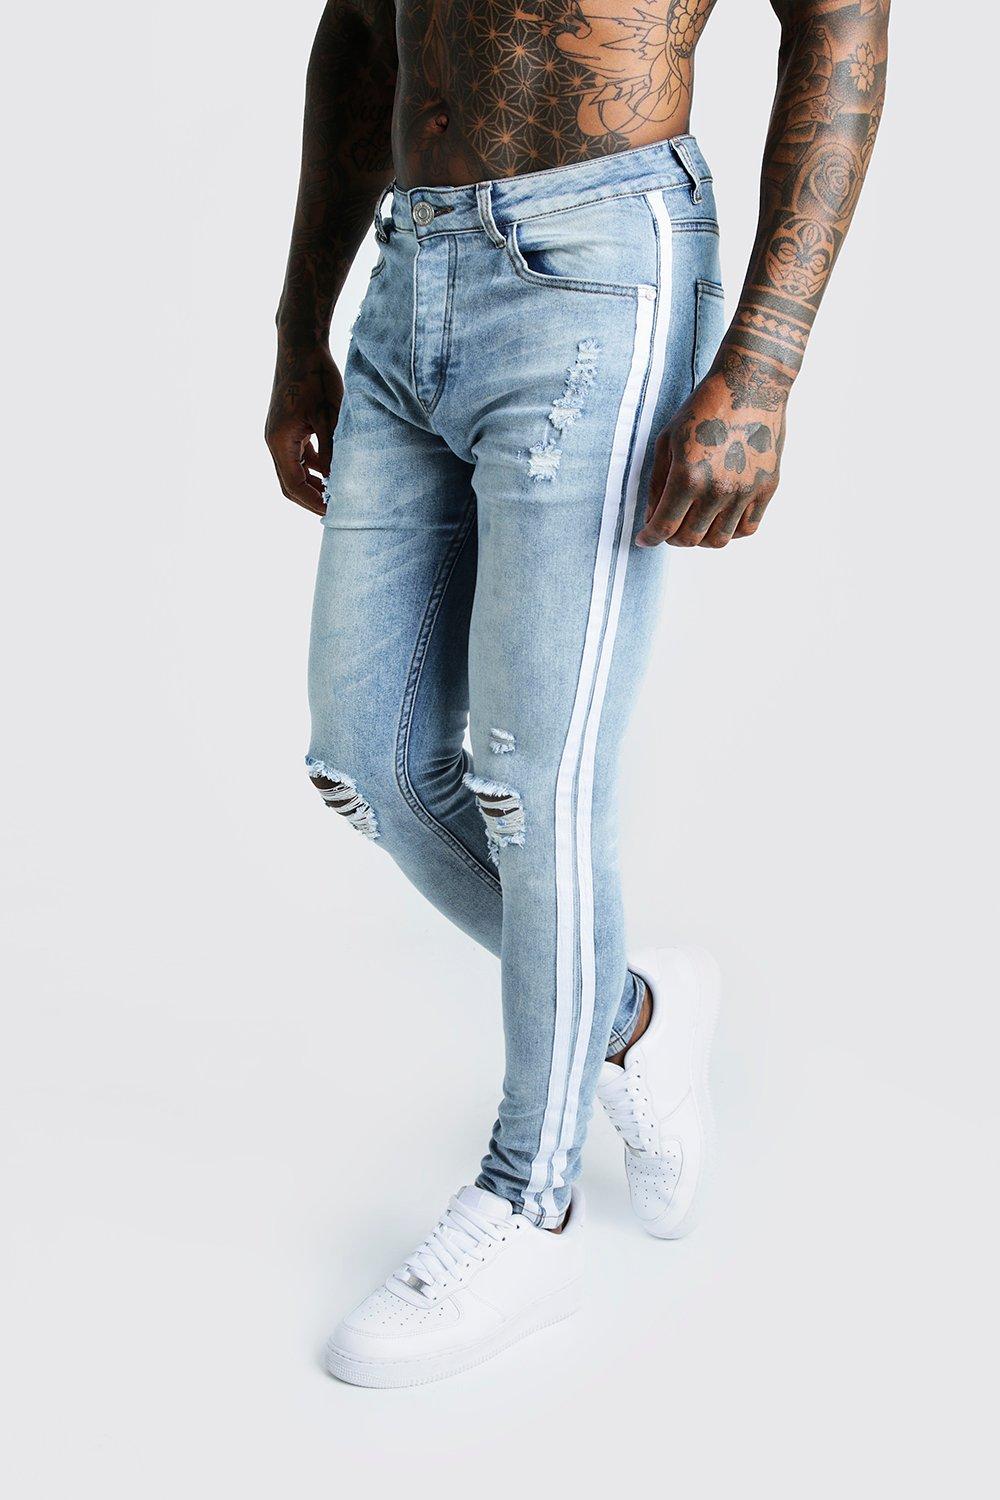 jeans with side tape